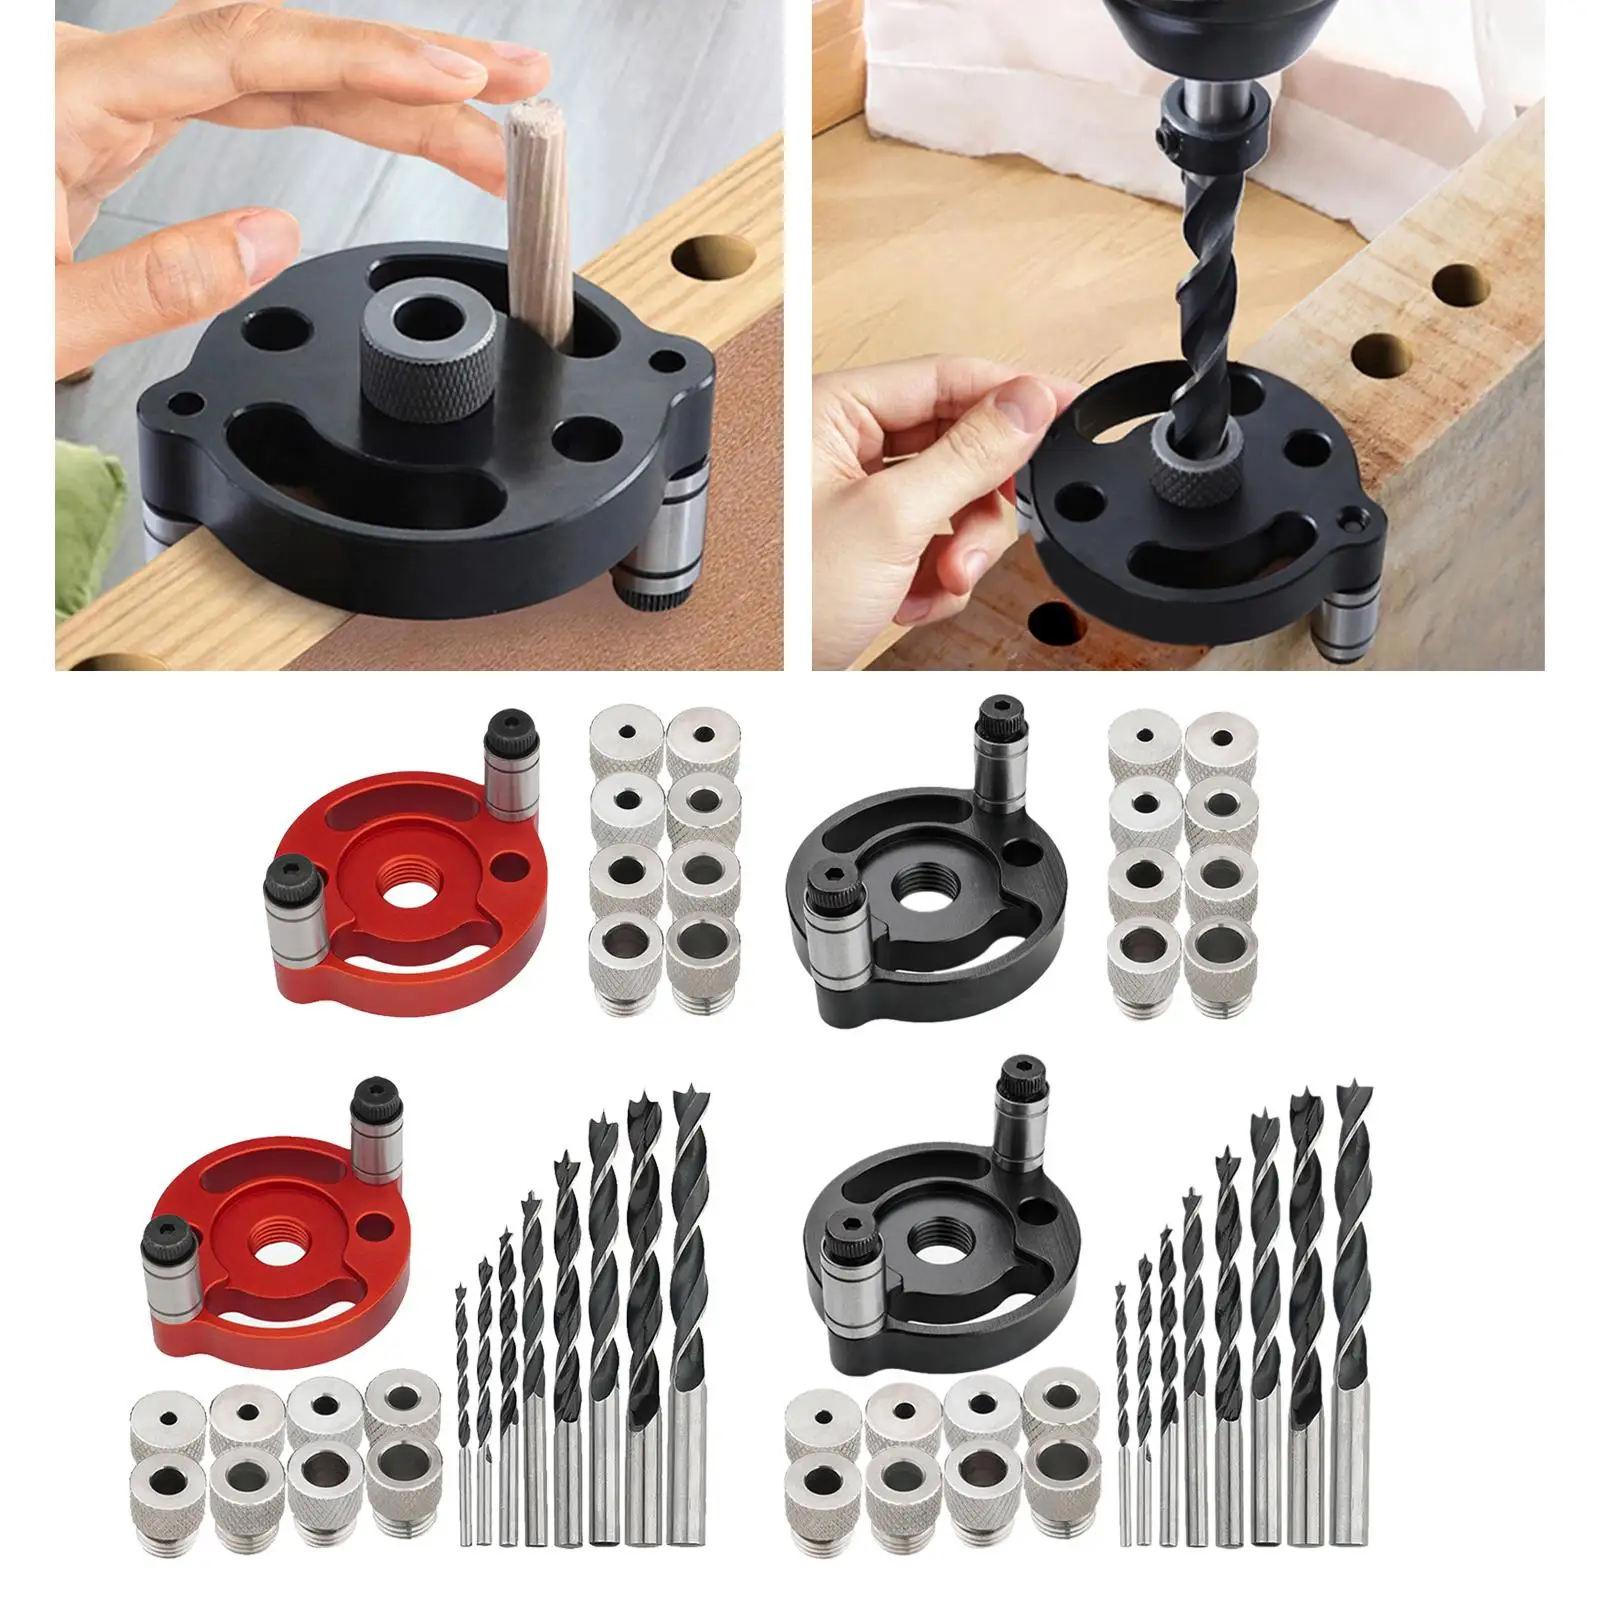 Self Centering Doweling Tool for Woodworking Joinery Furniture Making Worker